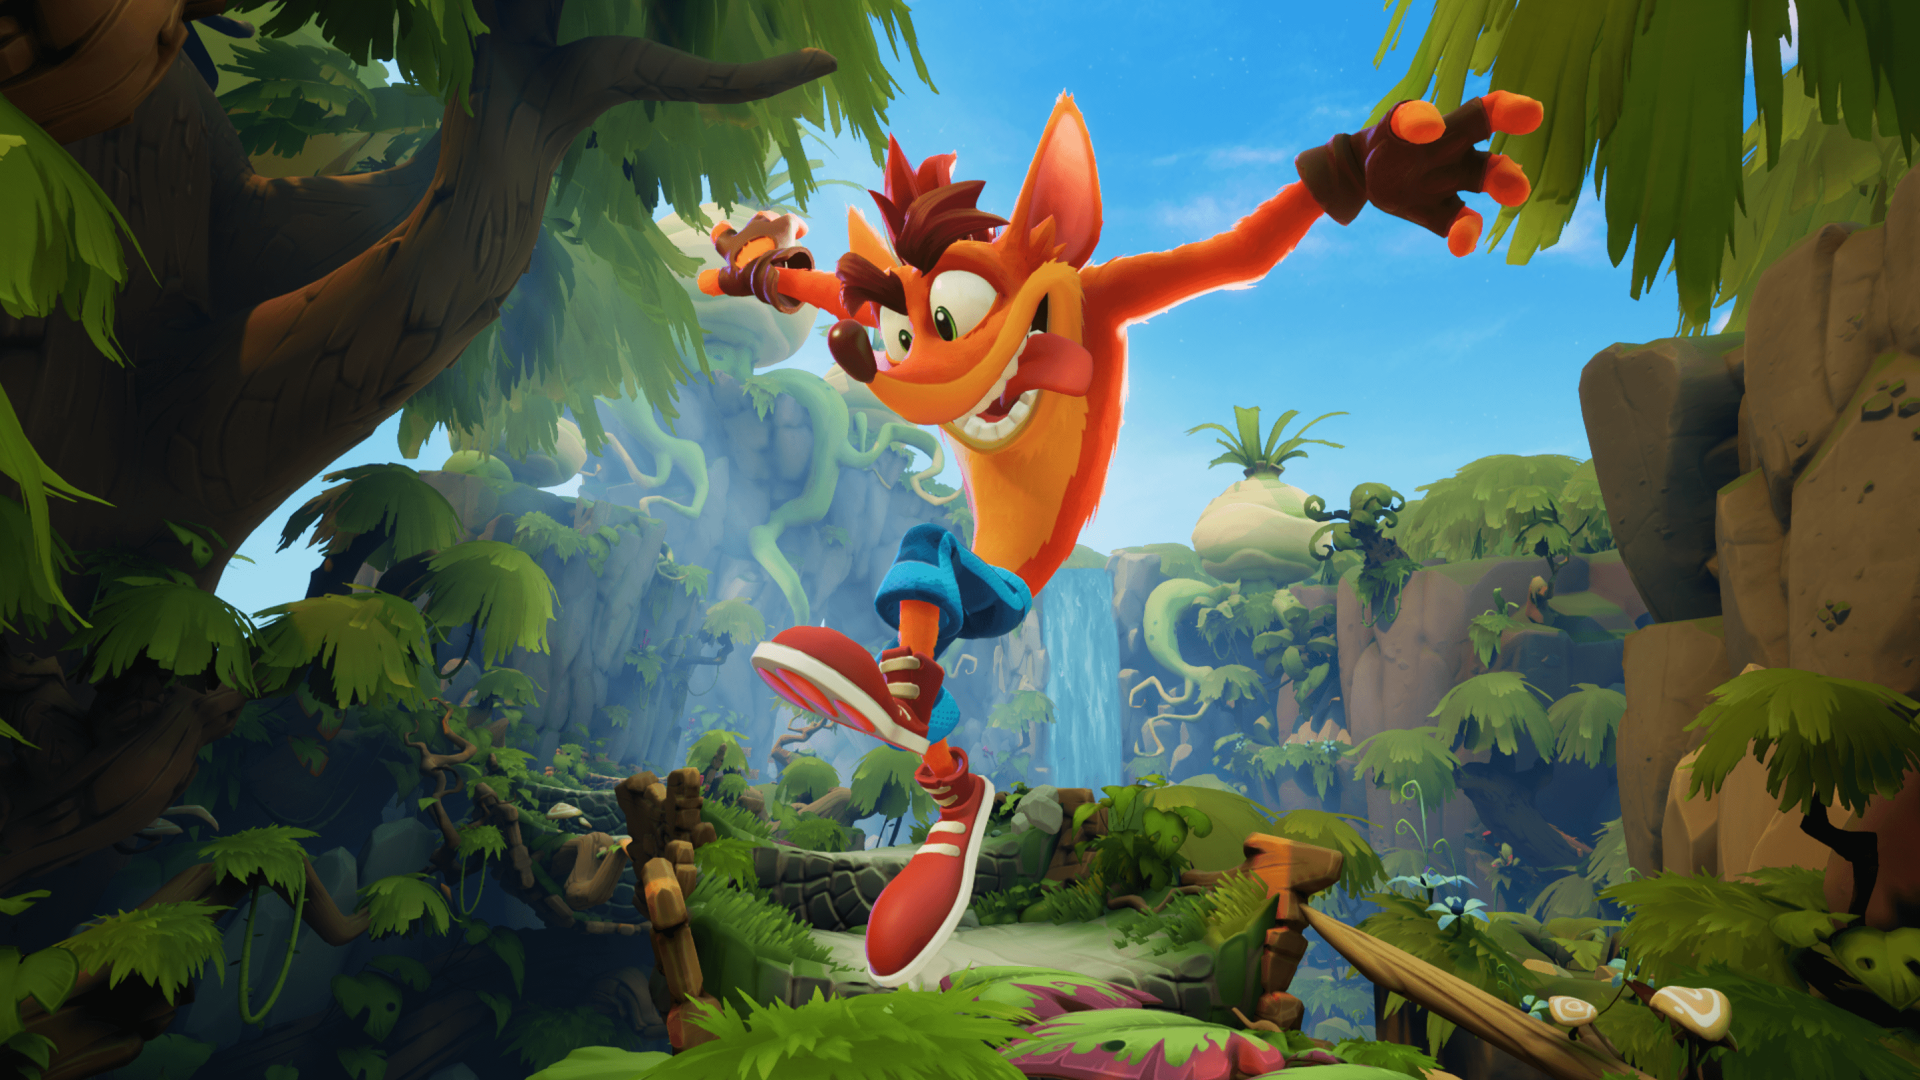 Crash Bandicoot 4: It's About Time Wallpapers